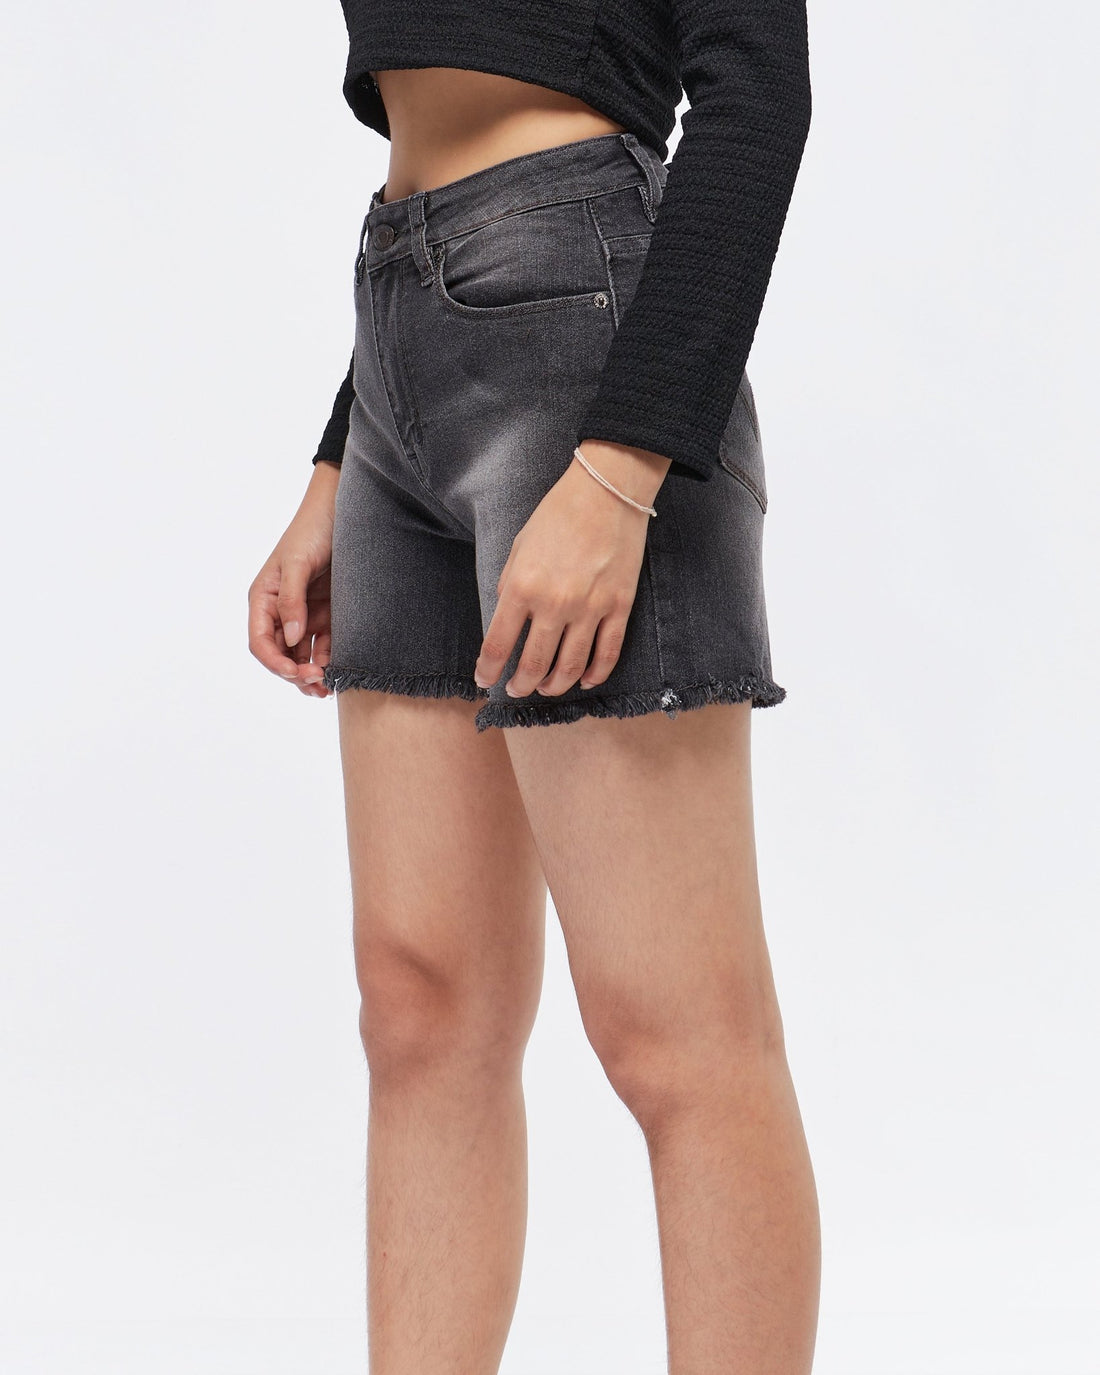 MOI OUTFIT-Raw Hem Lady Short Jeans 14.90